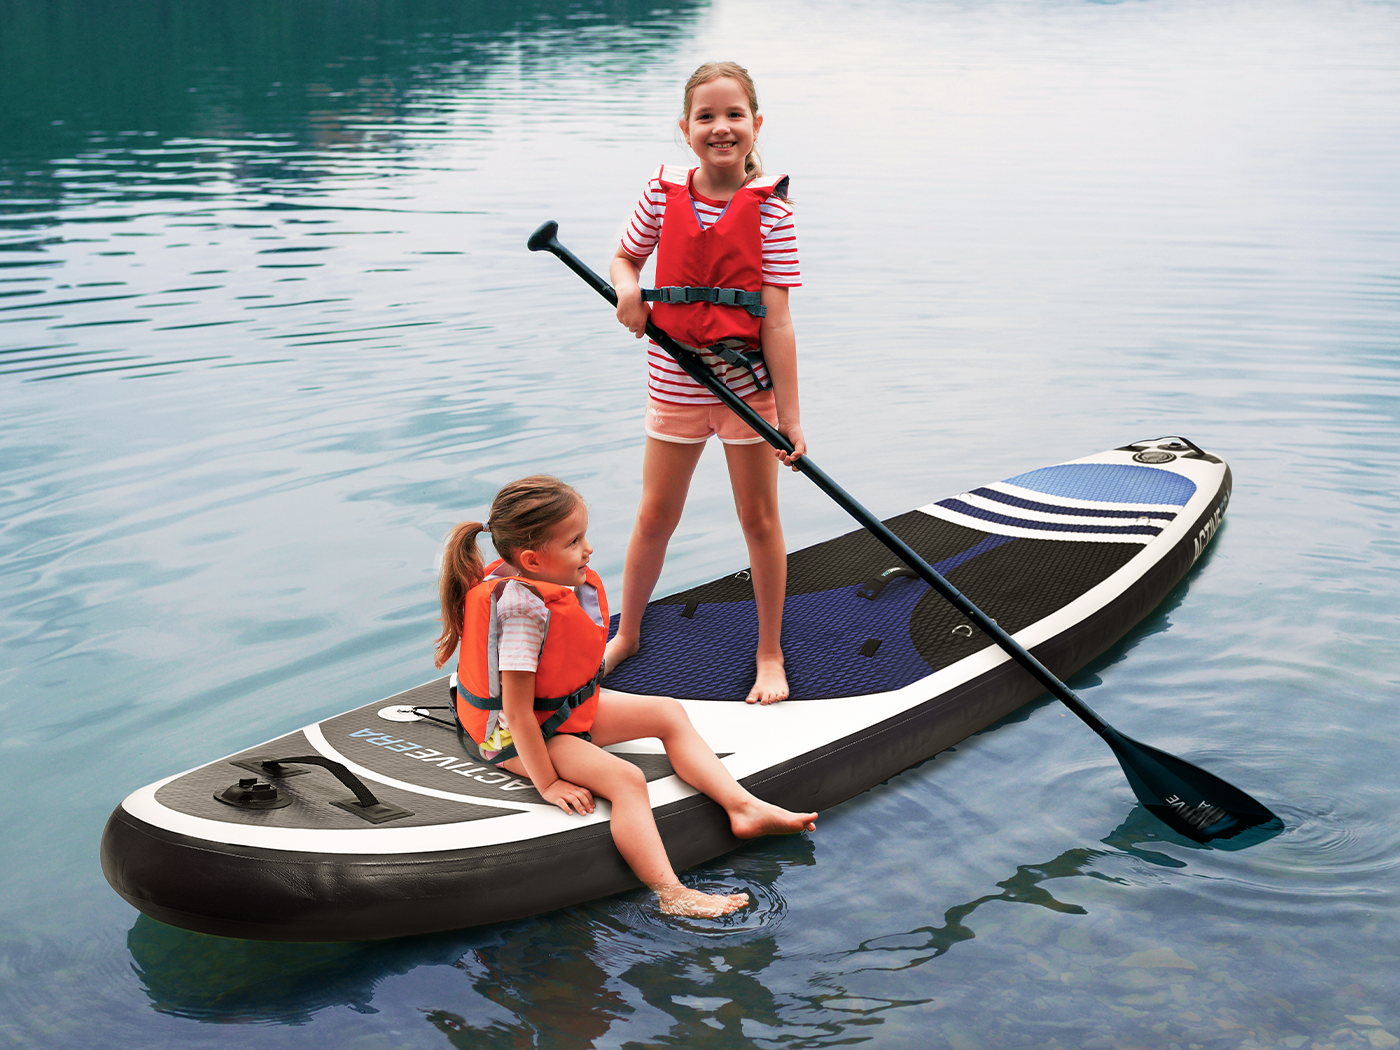 The Beginner's Guide to Paddle Boarding